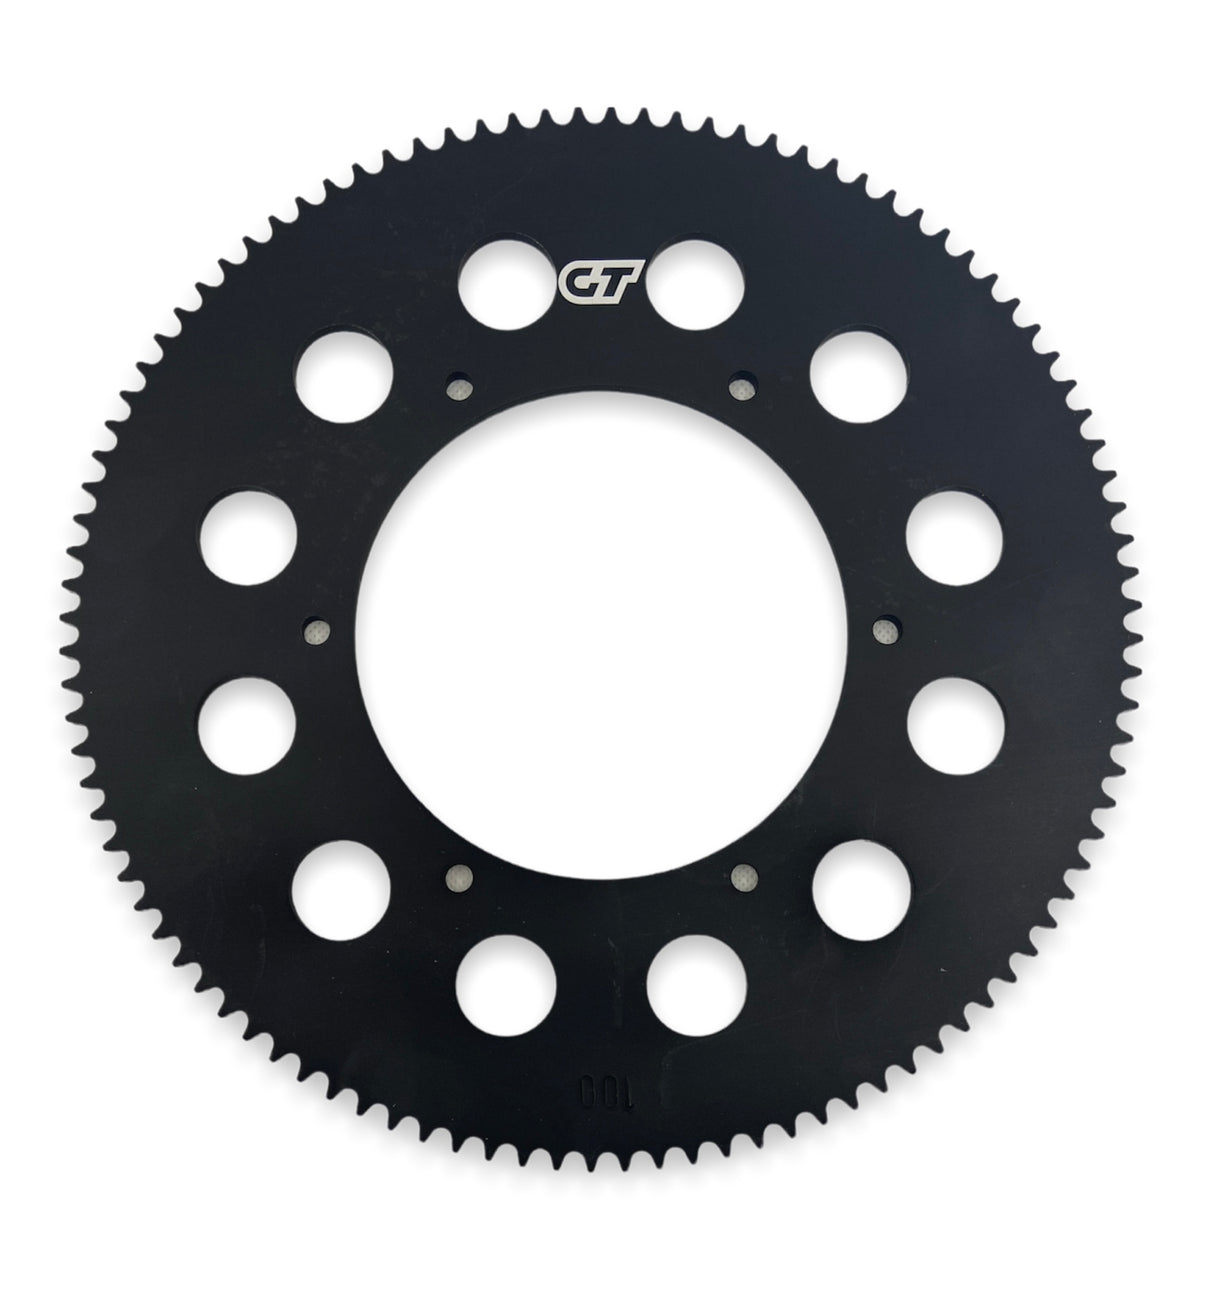 100T Rear Sprocket (Suitable for LMX 161 and LMX 64)